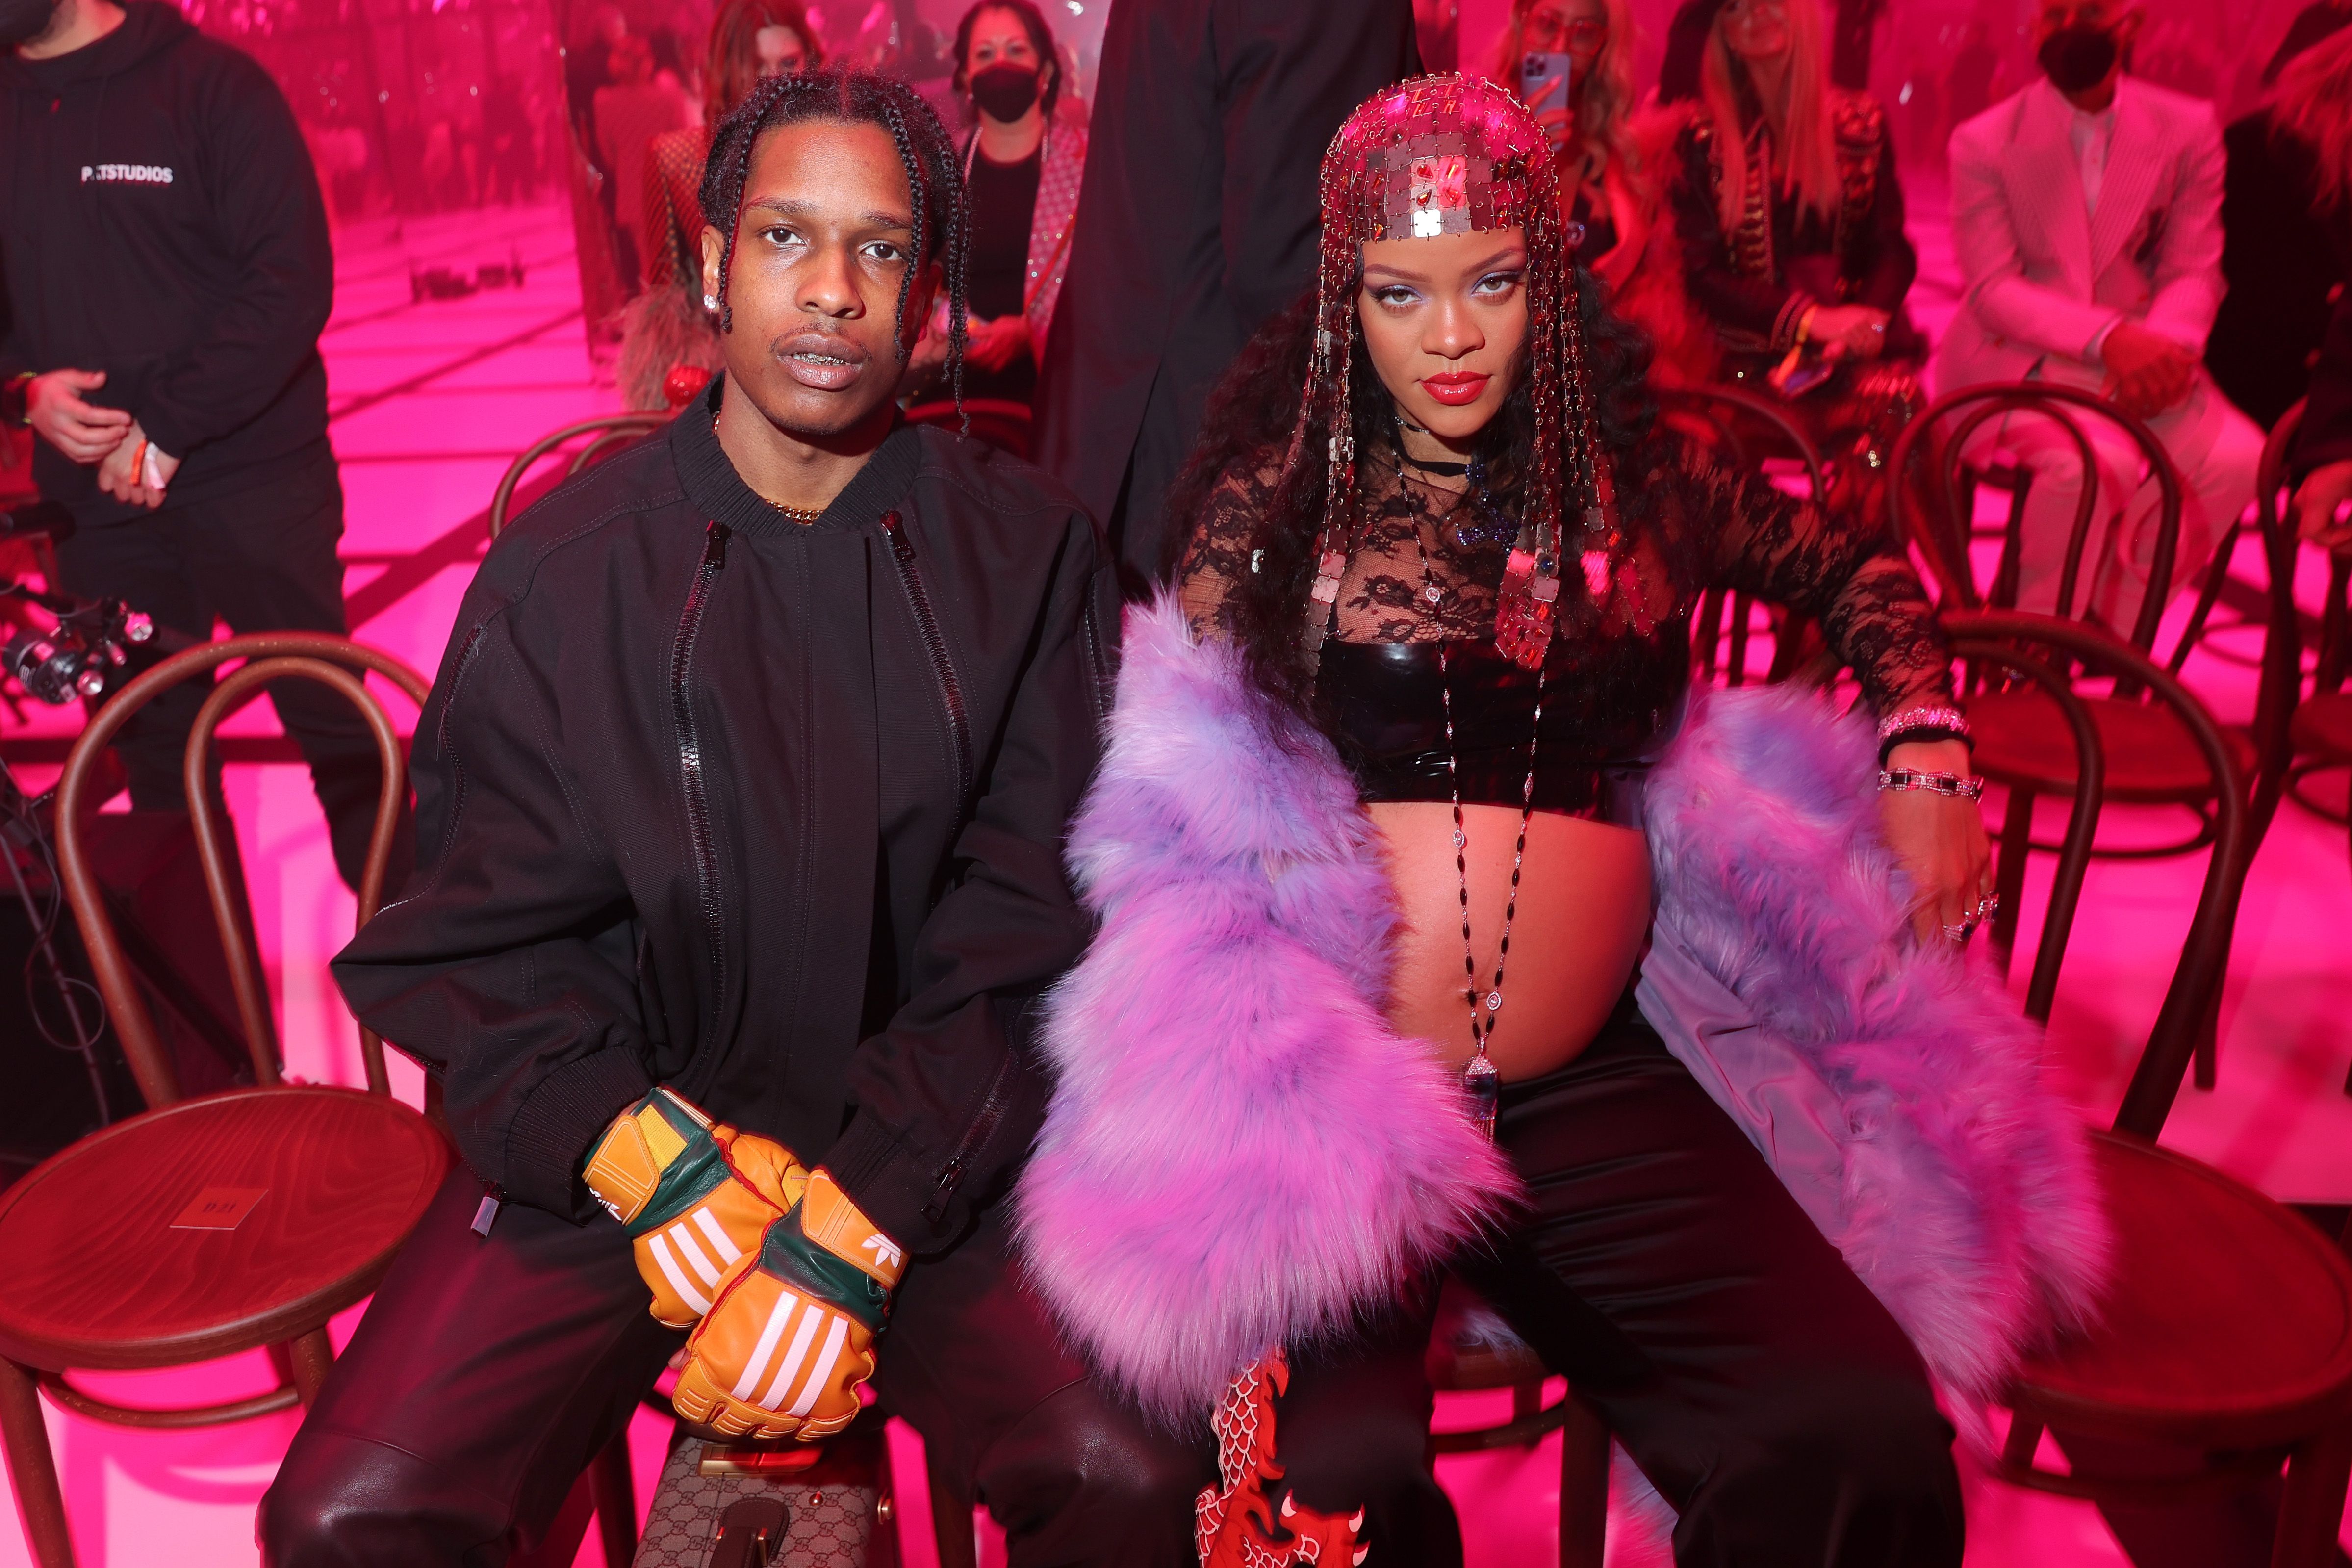 Rihanna and A$AP Rocky's Most Iconic Style Moments